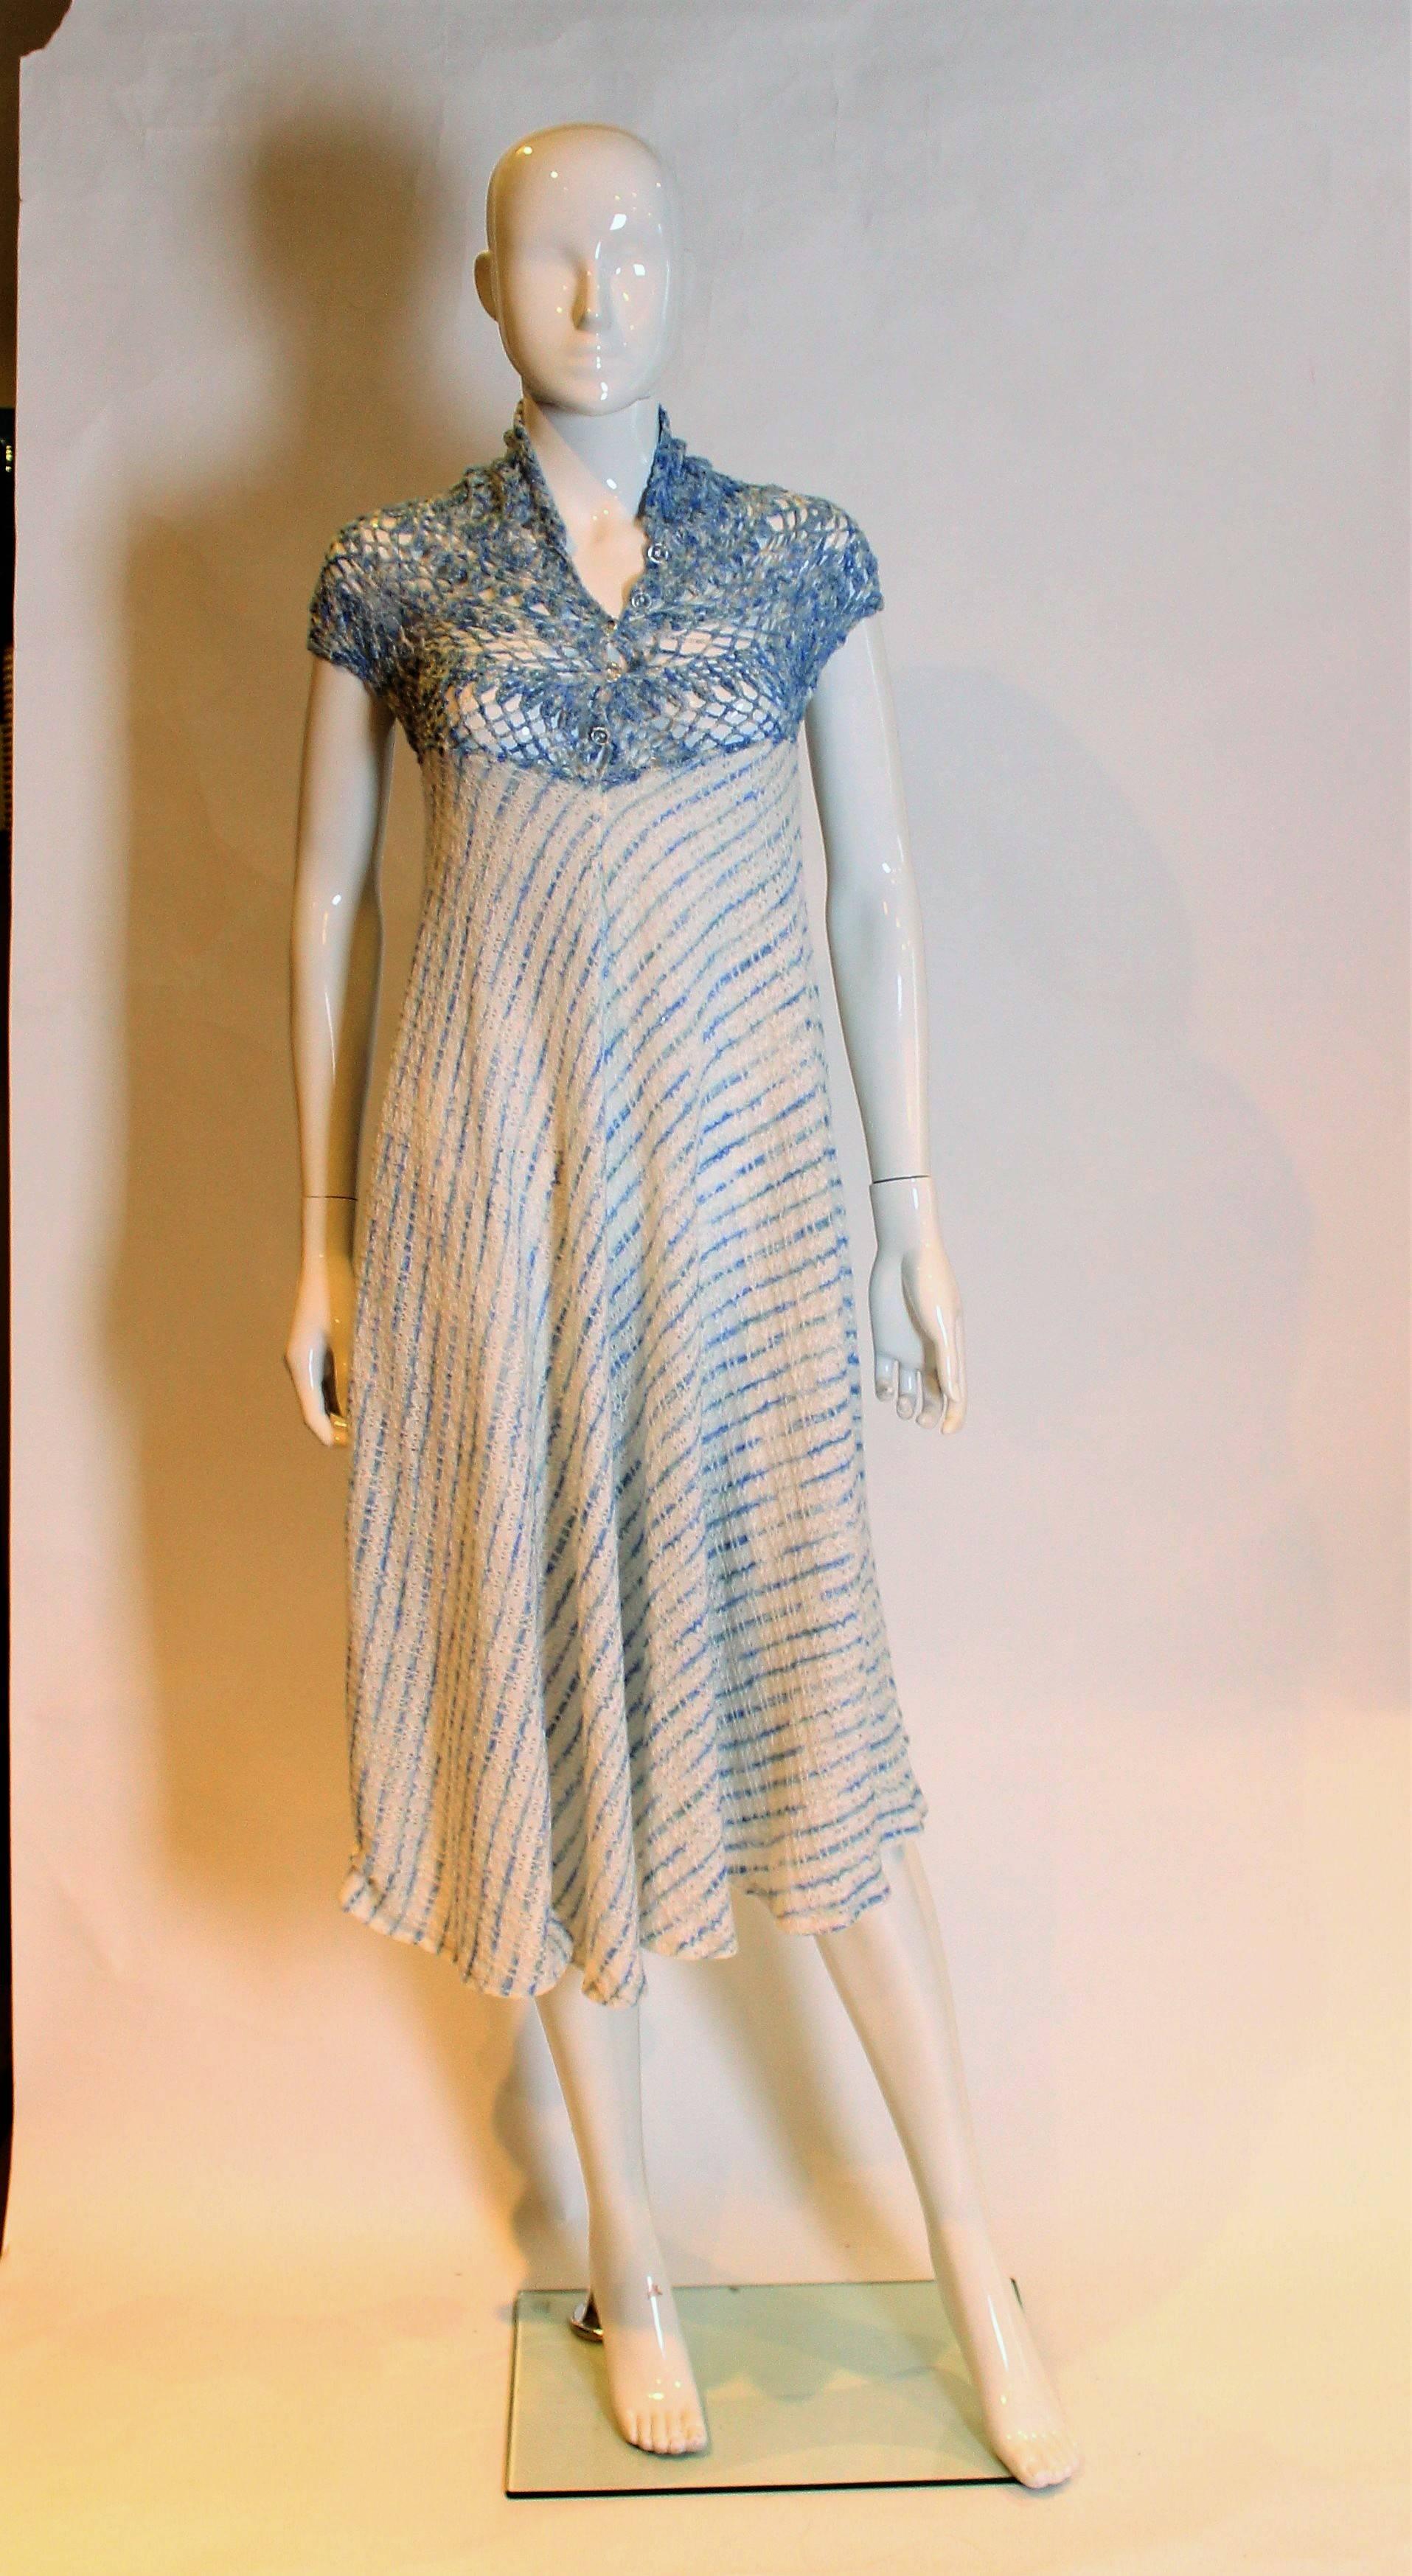 A great dress for Summer. This knitted dress has a blue and white top ,with 5 button opening at the front. The body of the dress is A line, giving a nice swing when you walk.